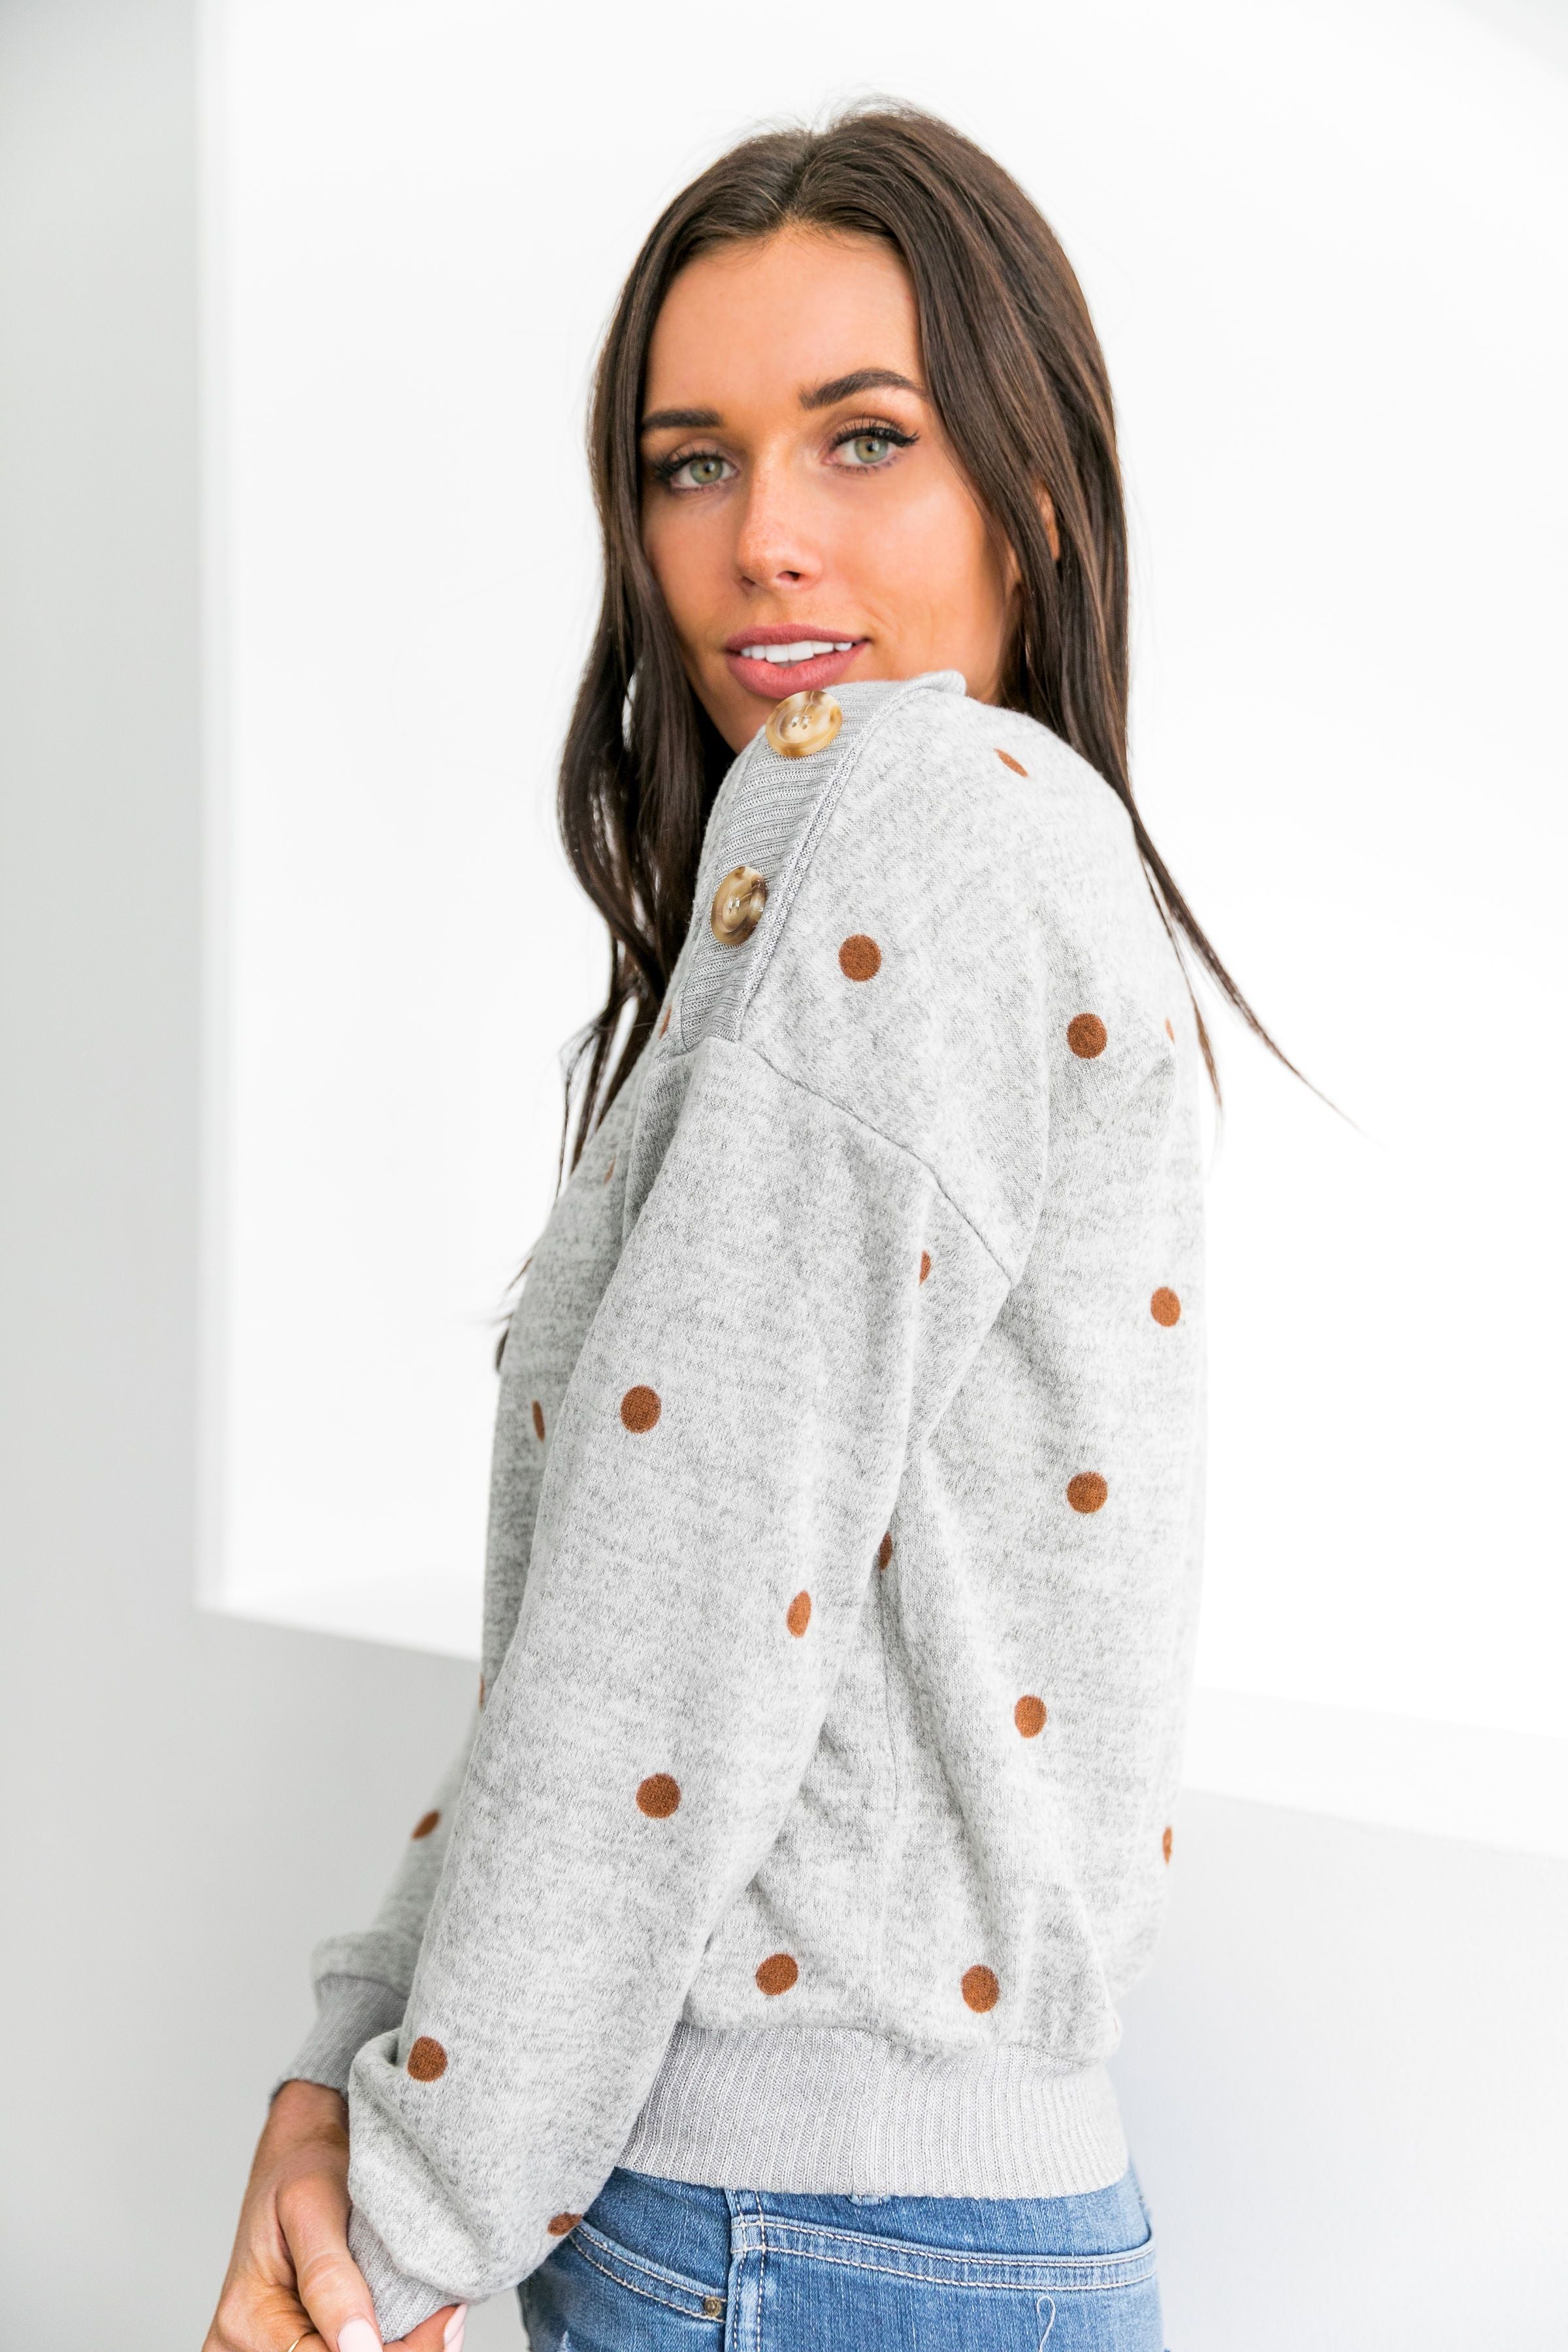 Buttons + Polka Dots Sweater - ALL SALES FINAL